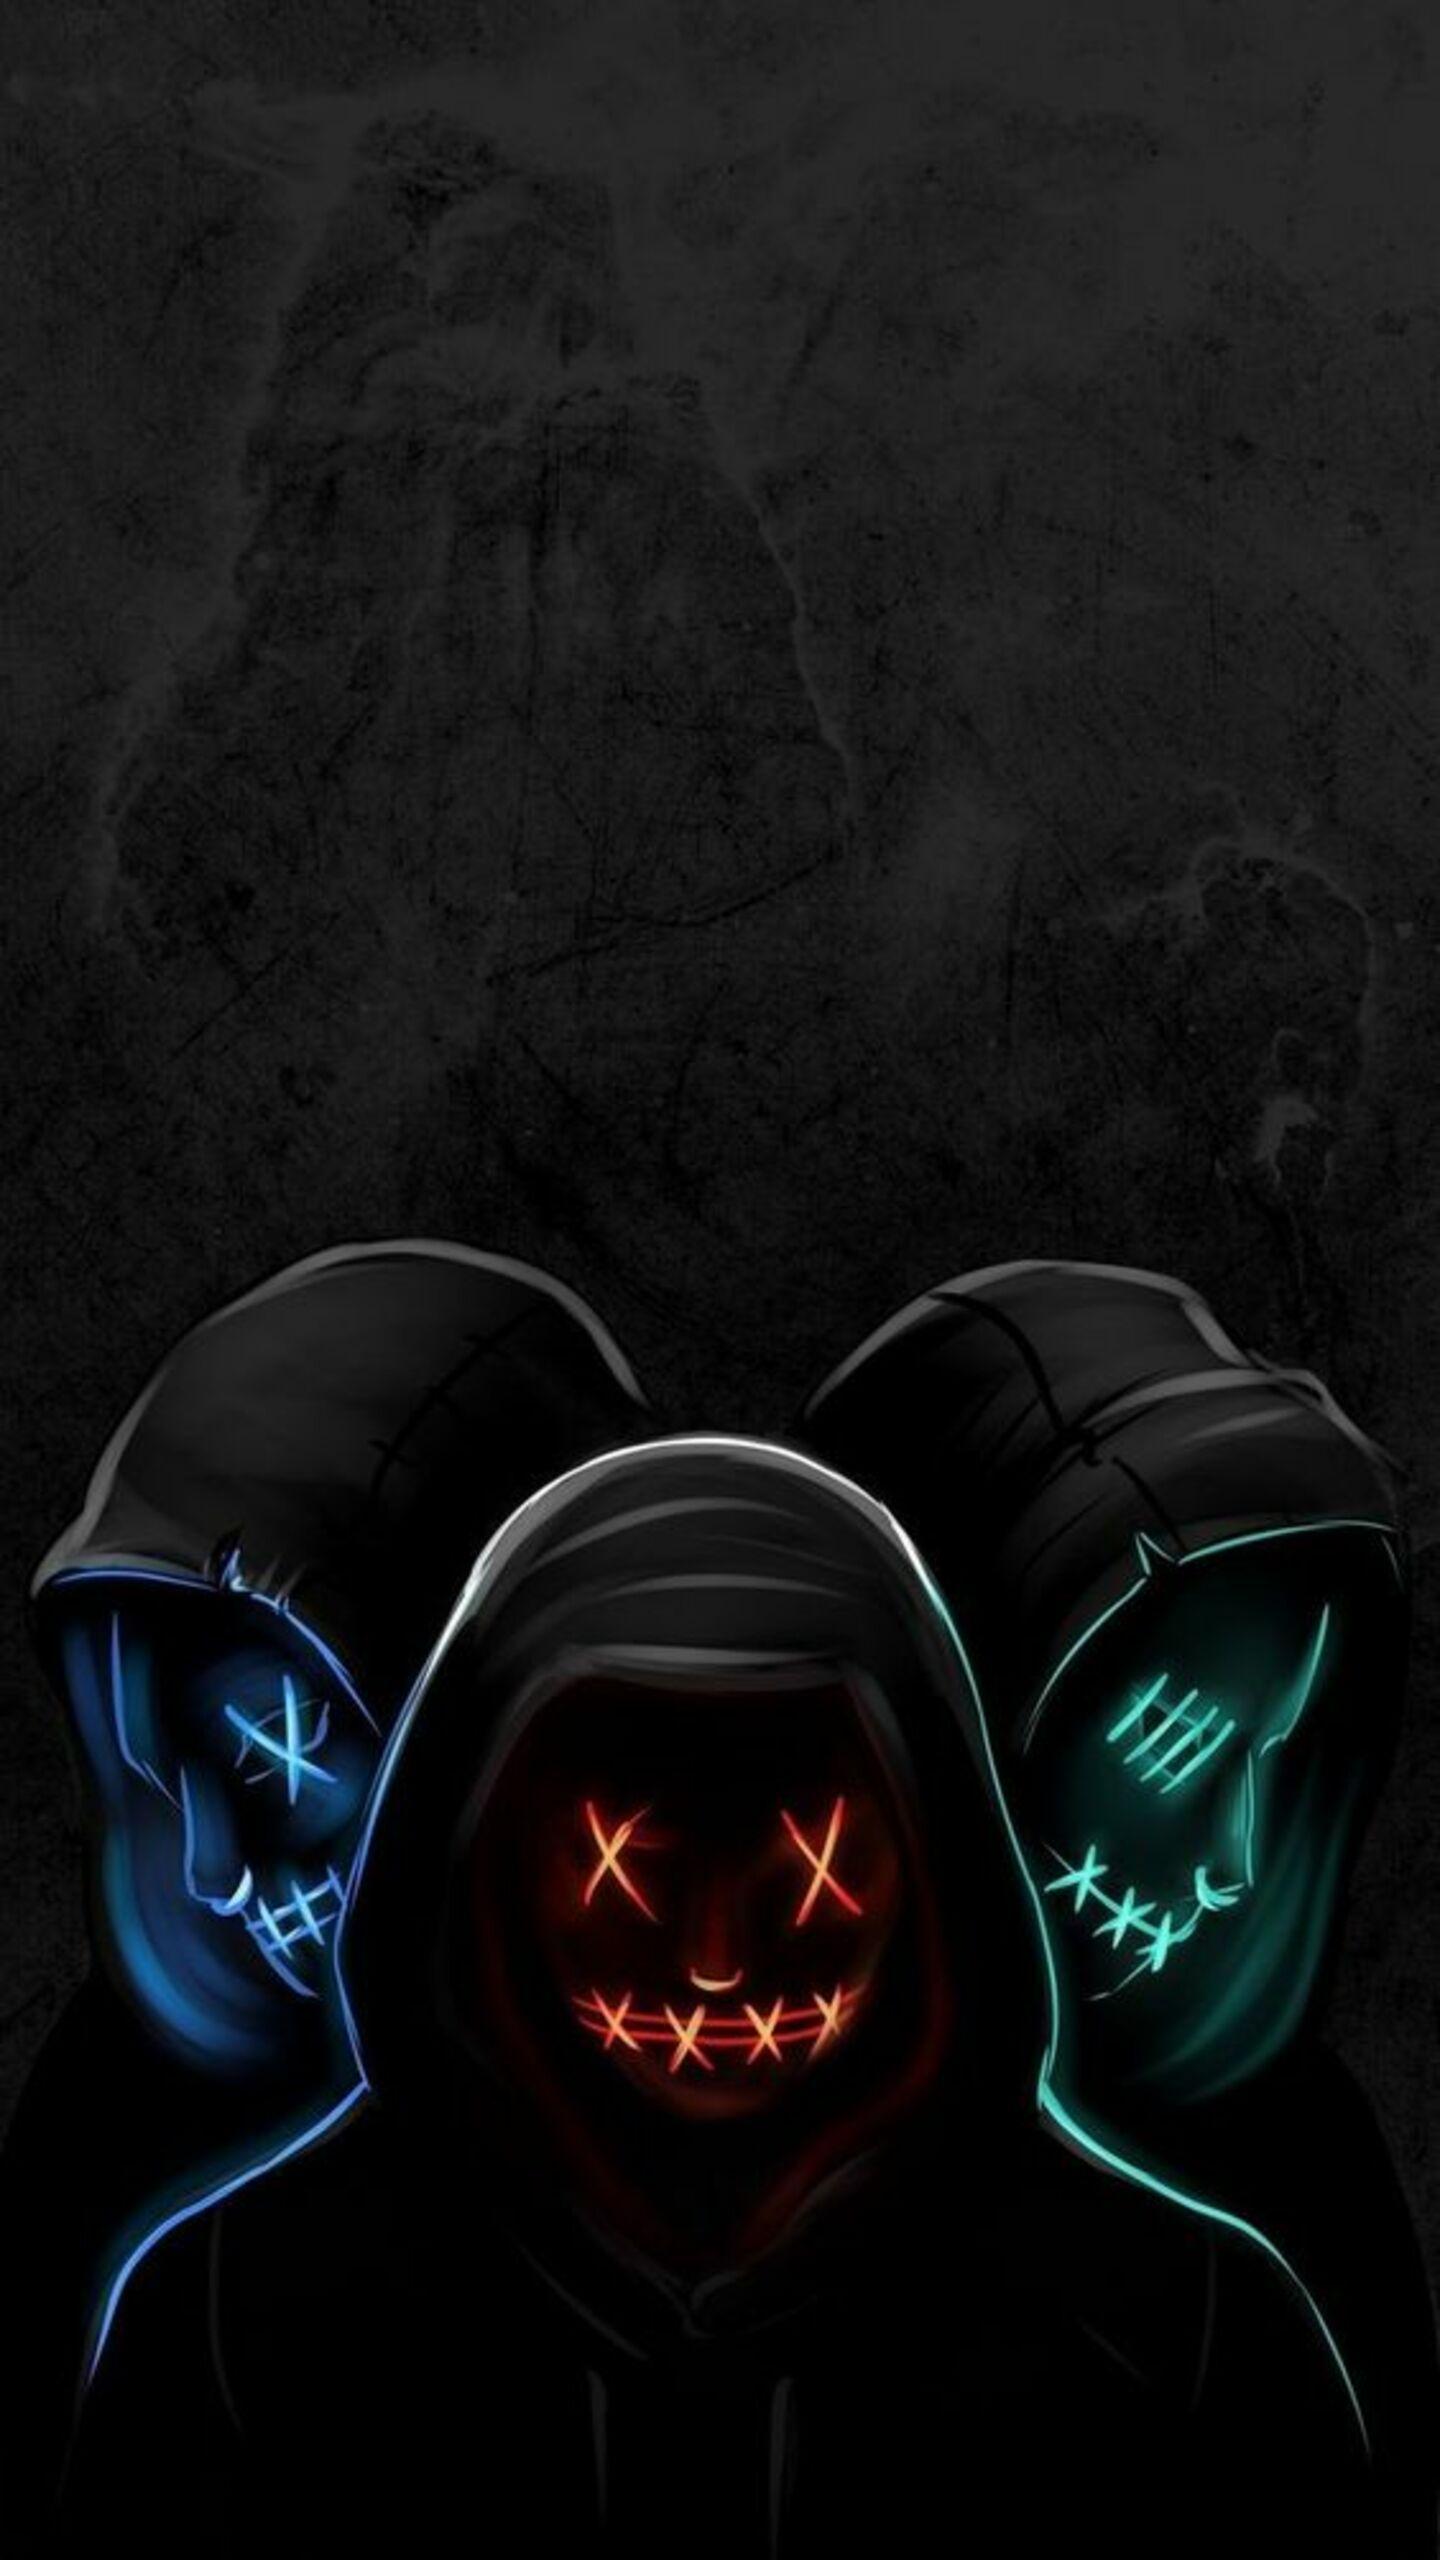 Led Purge Mask Wallpaper HD for Android